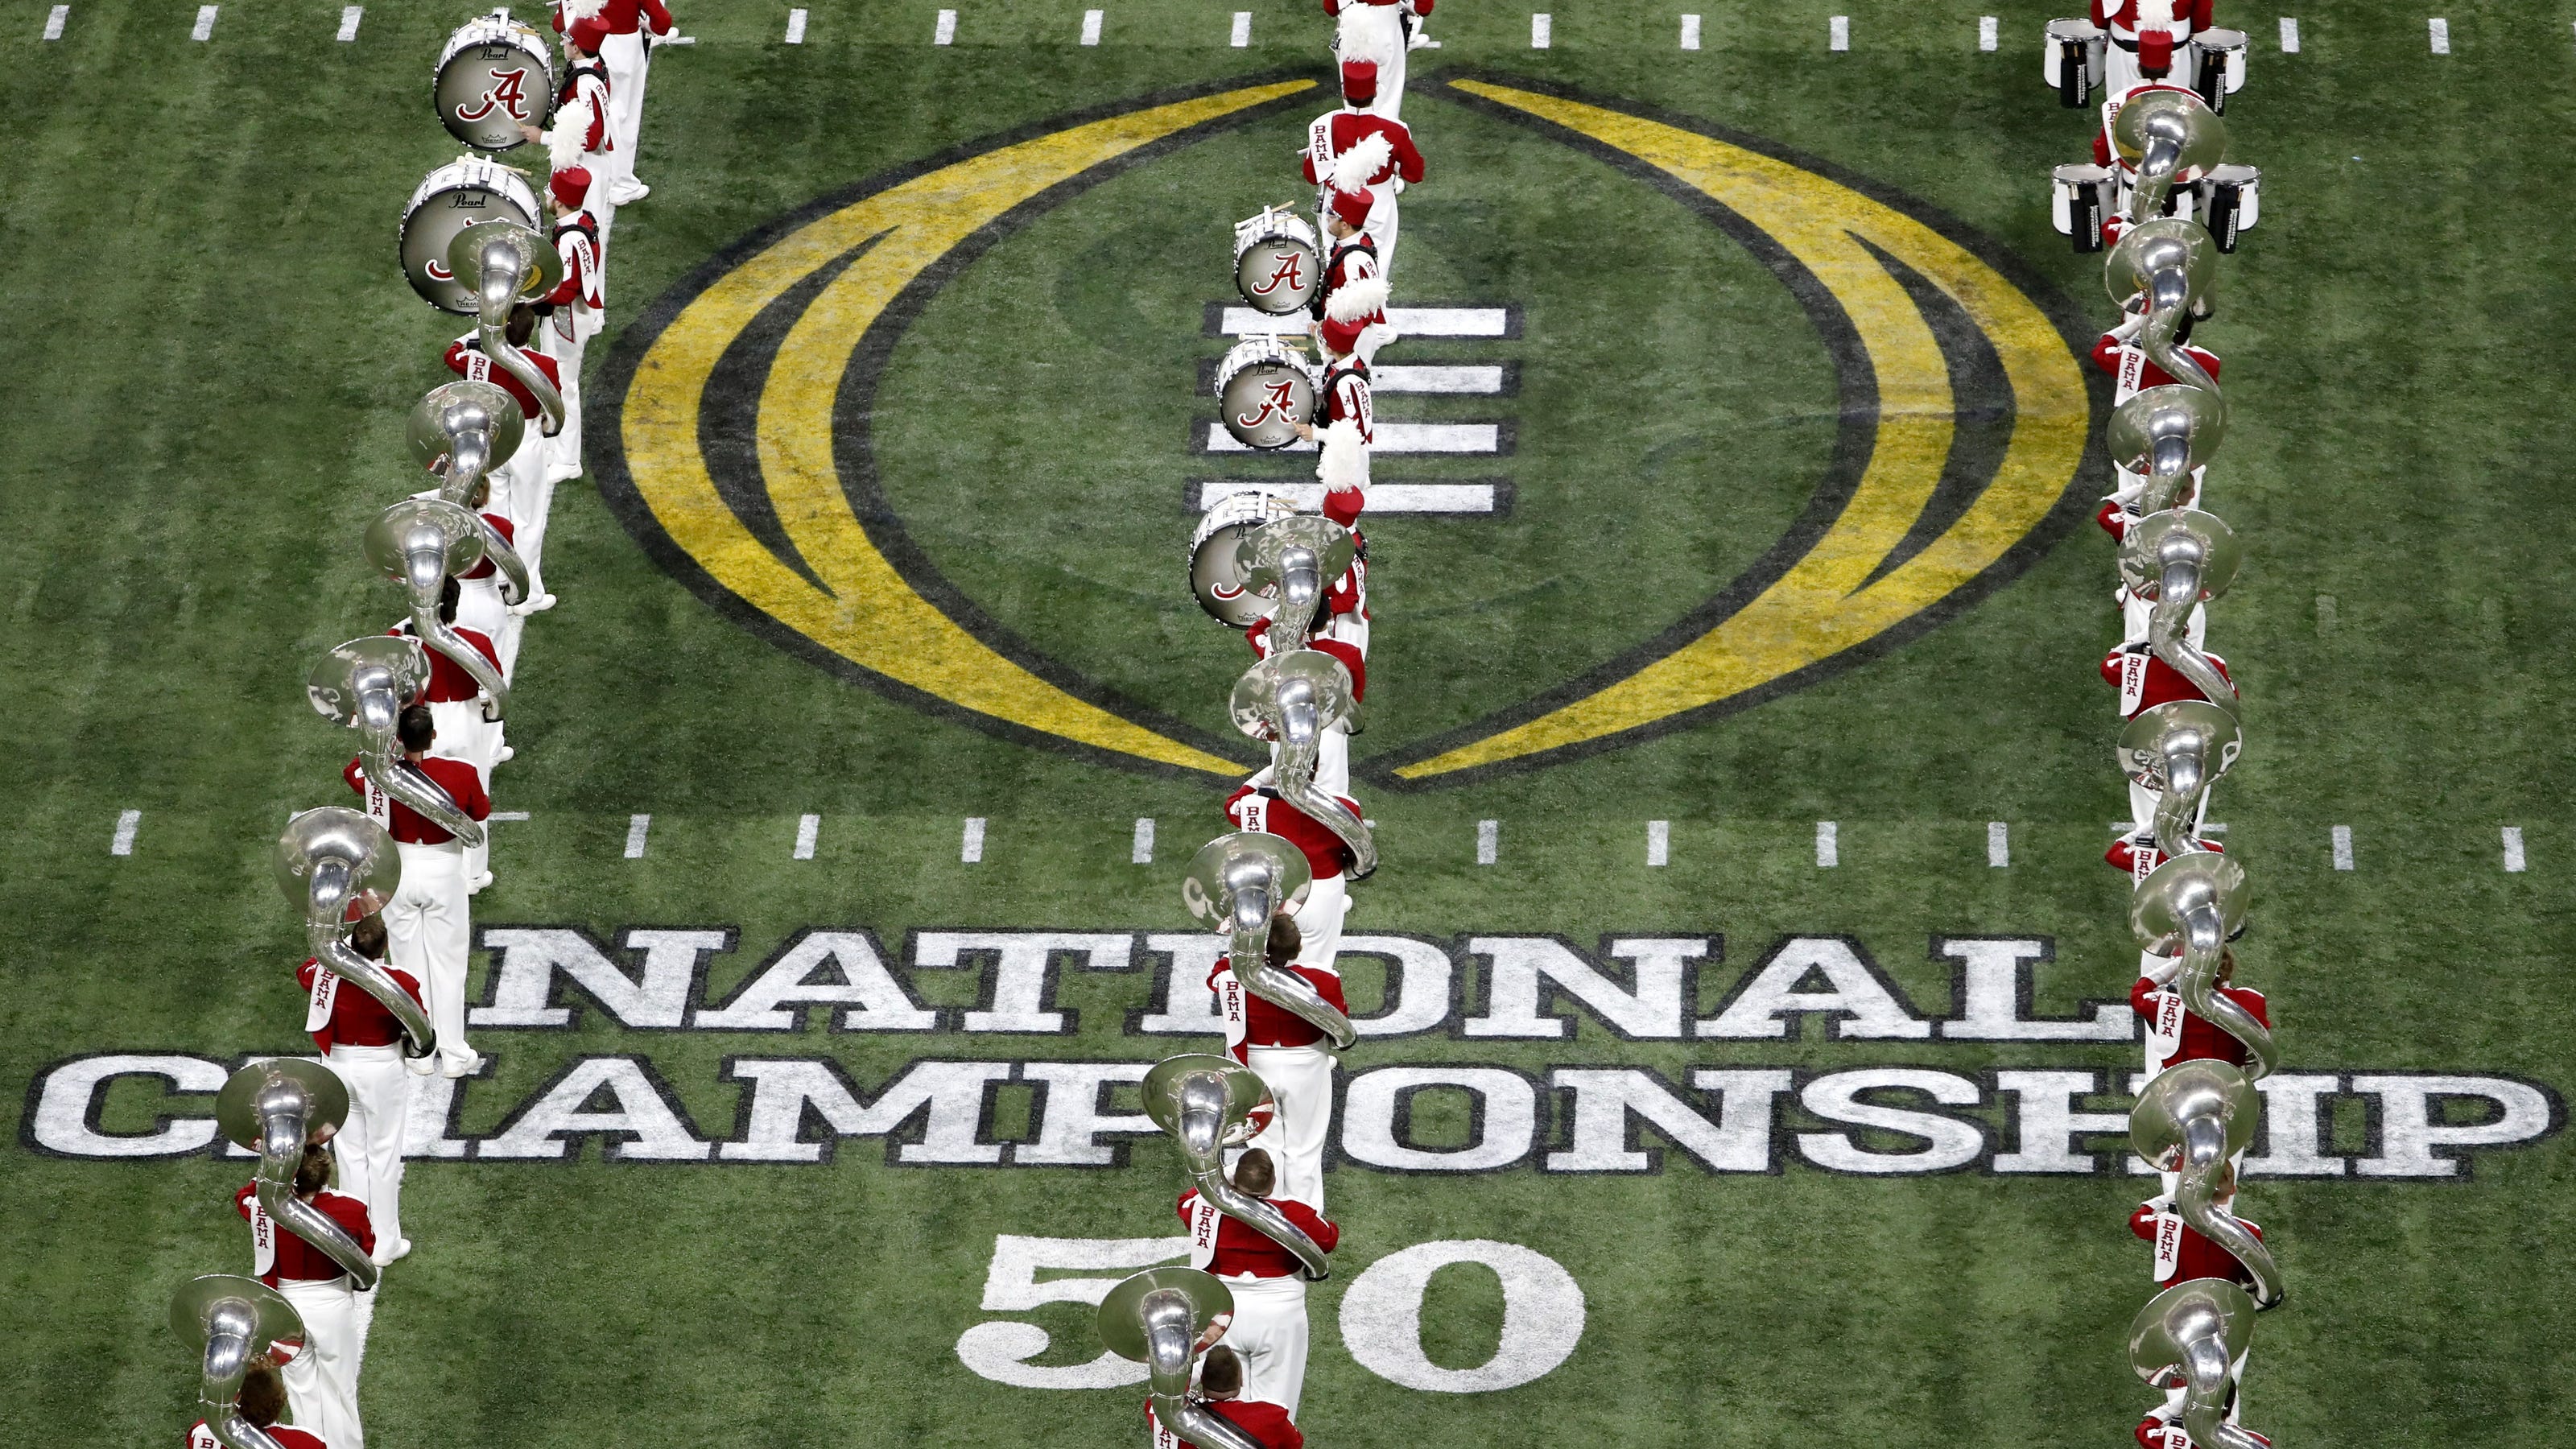 It's official College Football Playoff expanding to 12 teams for 2024